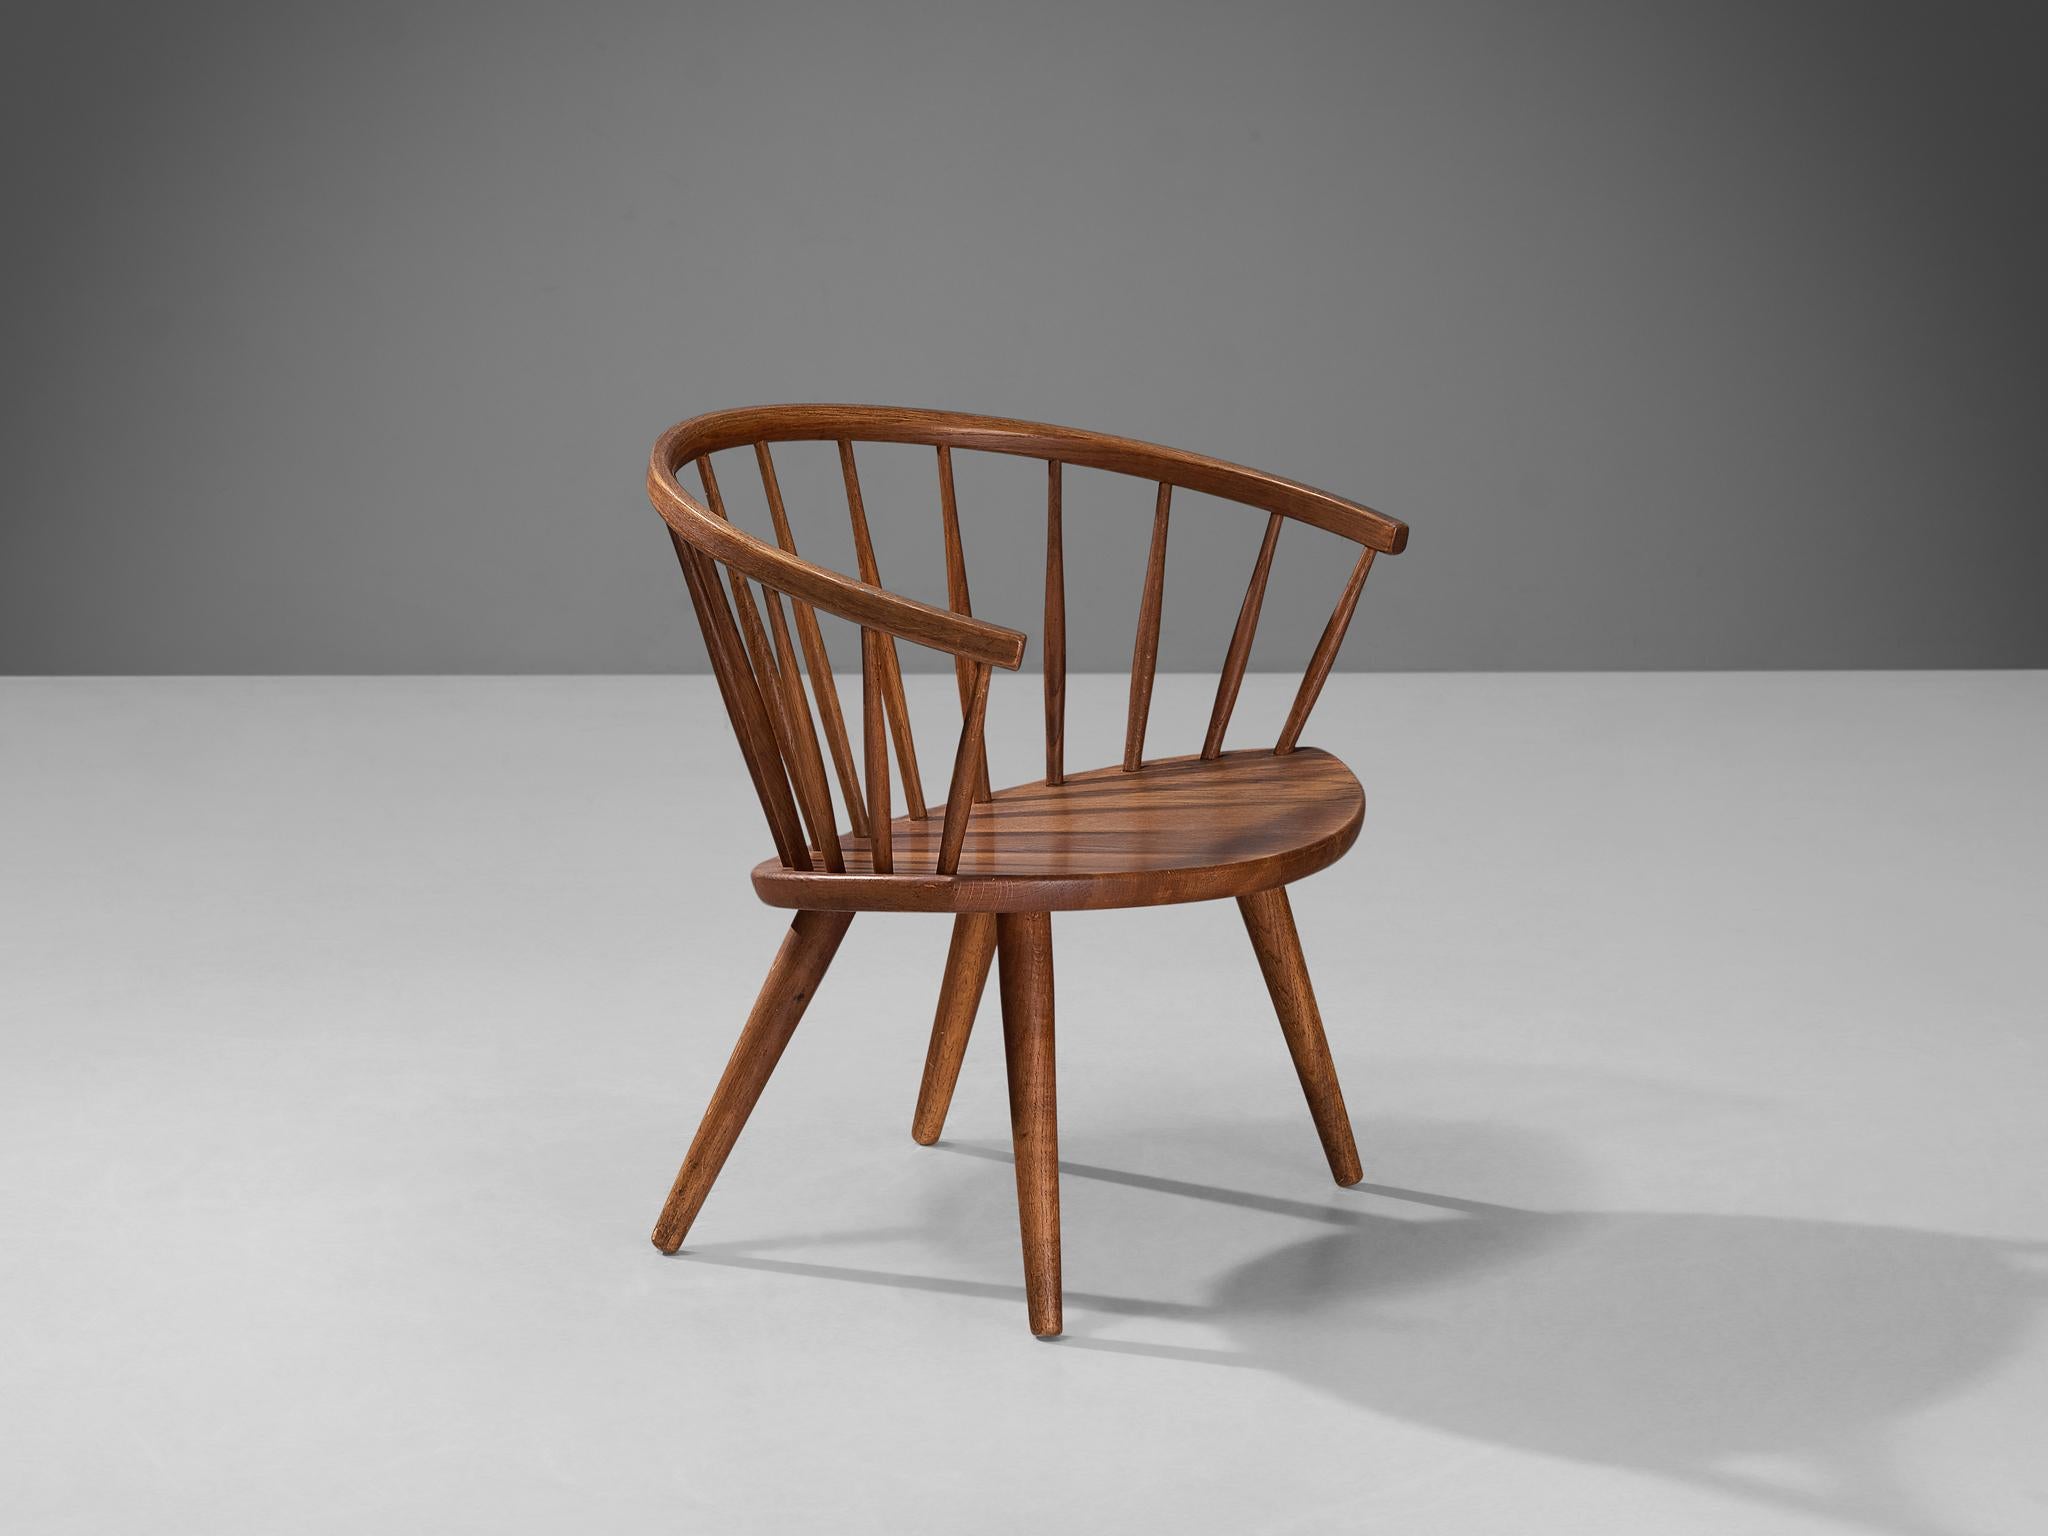 Yngve Ekström for Stolab, 'Arka' armchair, oak, Sweden, 1955

This armchair is a prime example of Scandinavian Mid-Century design ideology. This spindle back chair is known for its comfort and durability with a very elegant look from every point of